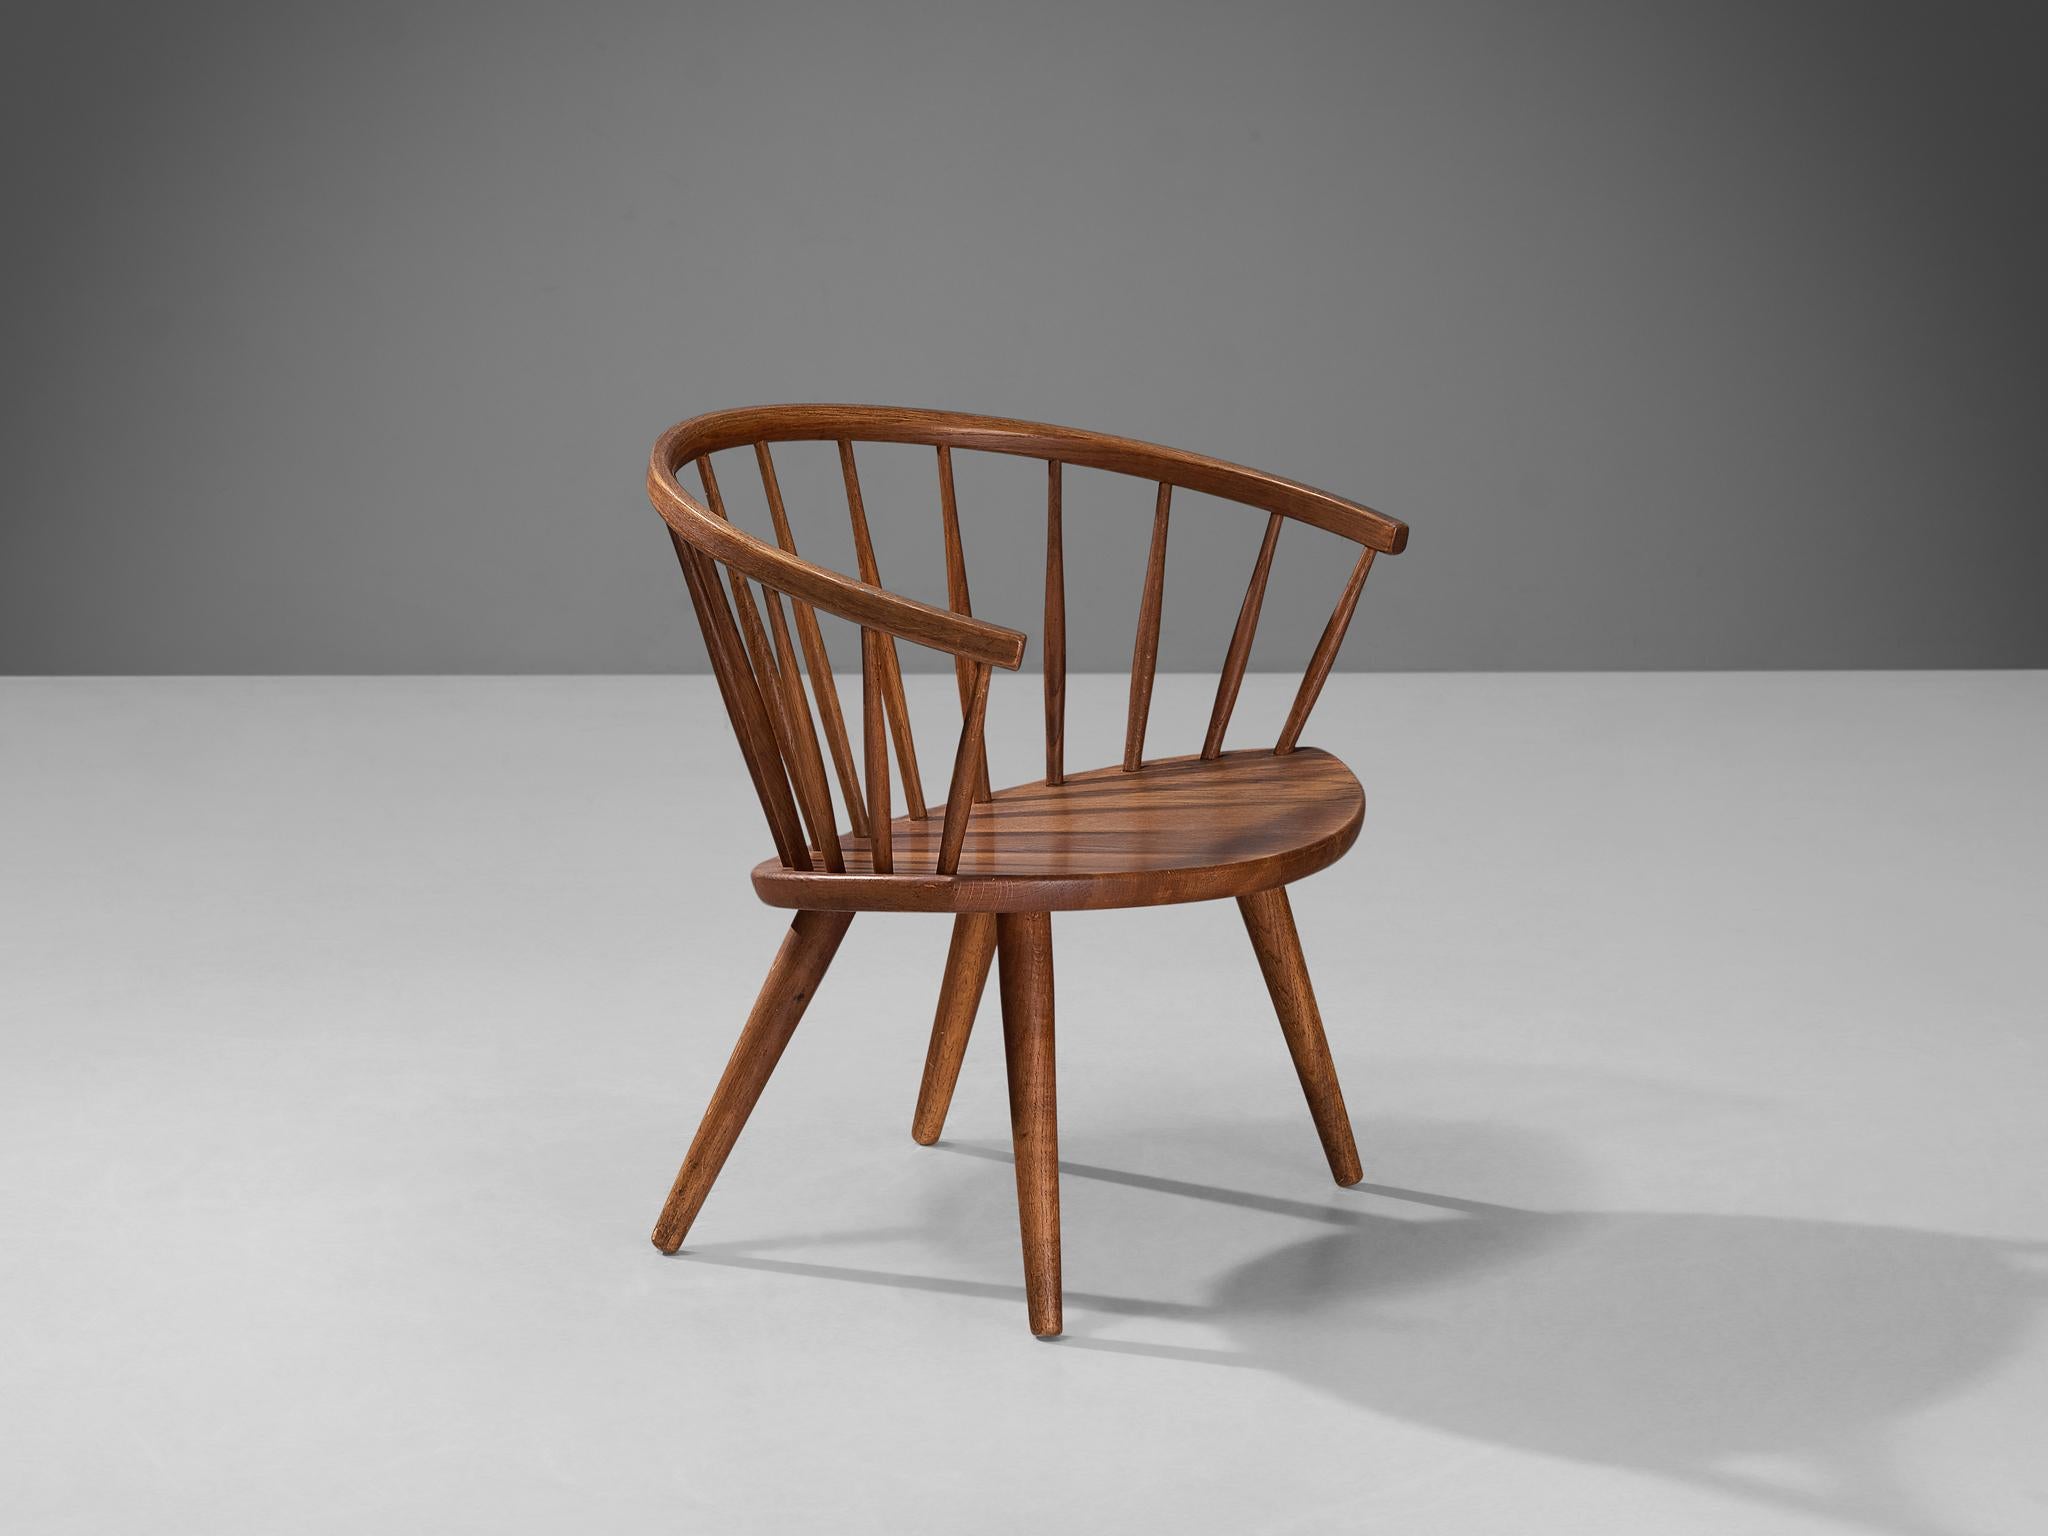 Yngve Ekström for Stolab, 'Arka' armchair, oak, Sweden, 1955

This armchair is a prime example of Scandinavian Mid-Century design ideology. This spindle back chair is known for its comfort and durability with a very elegant look from every point of